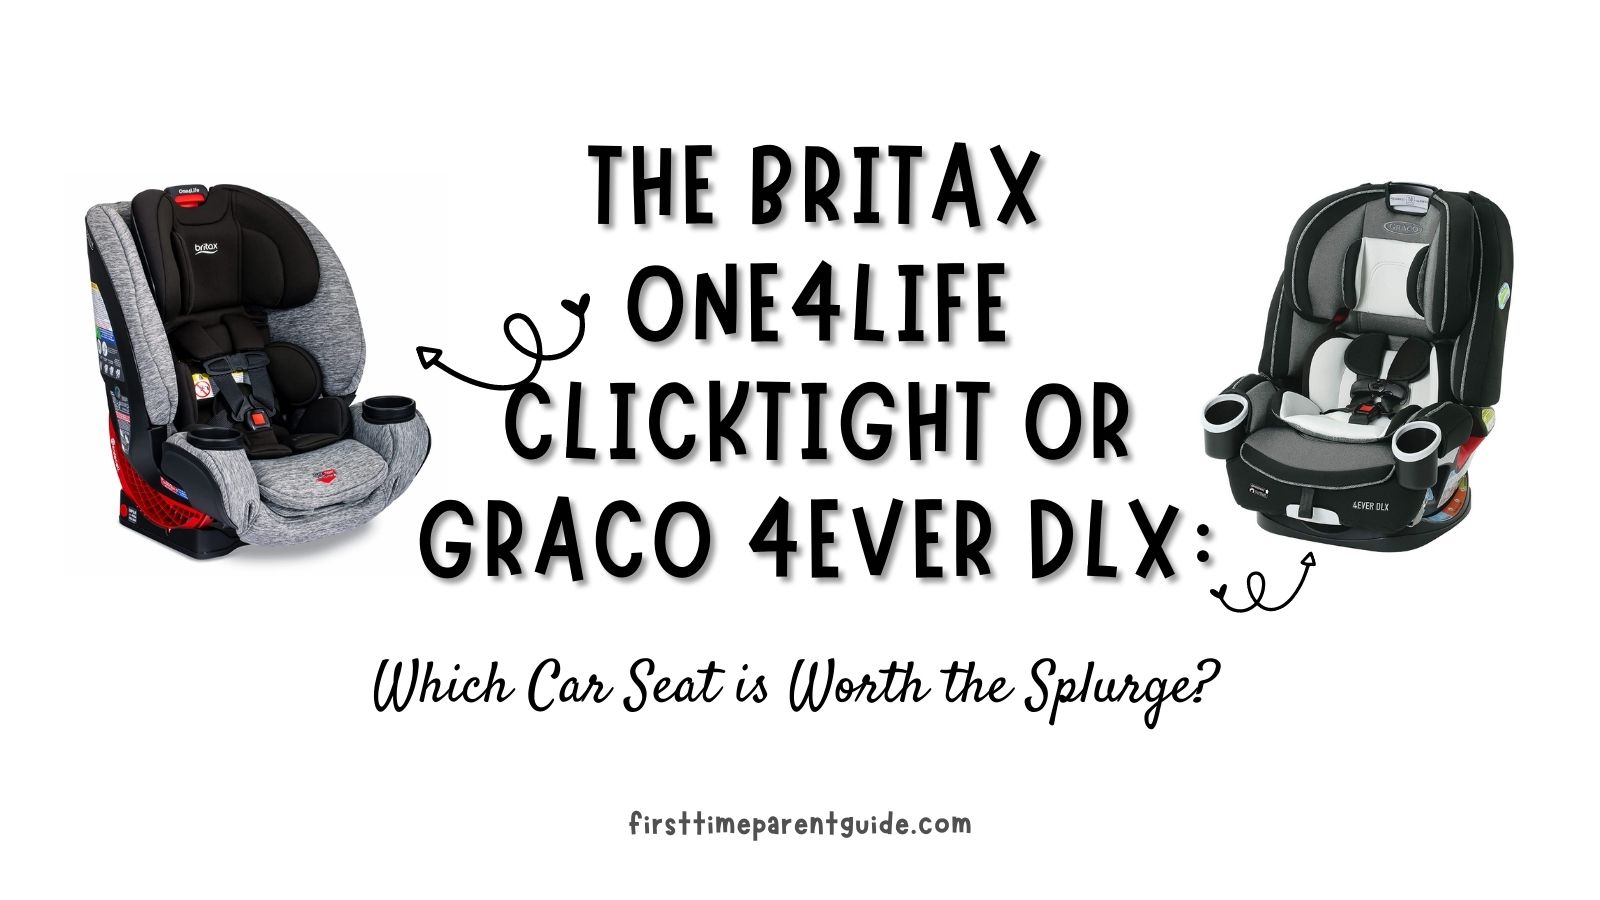 The Britax One4Life Clicktight Or